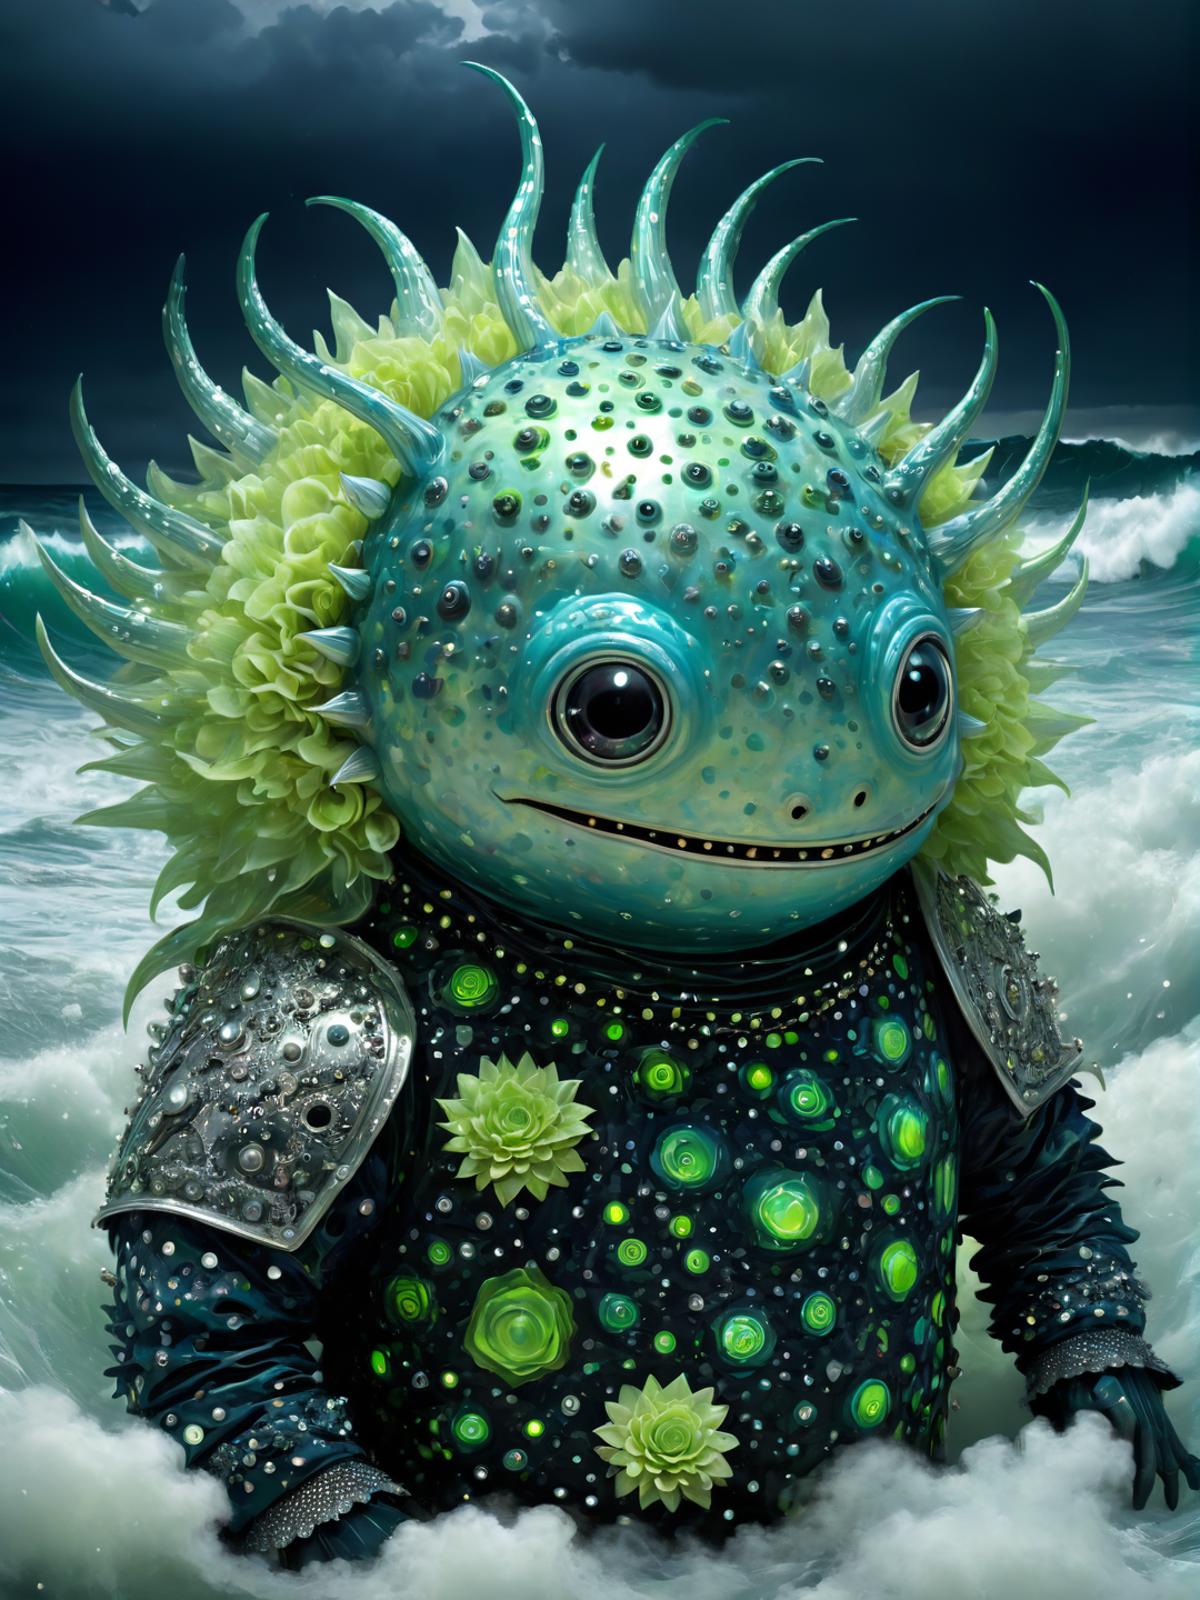 A whimsical underwater creature with spiky hair and green flowers.